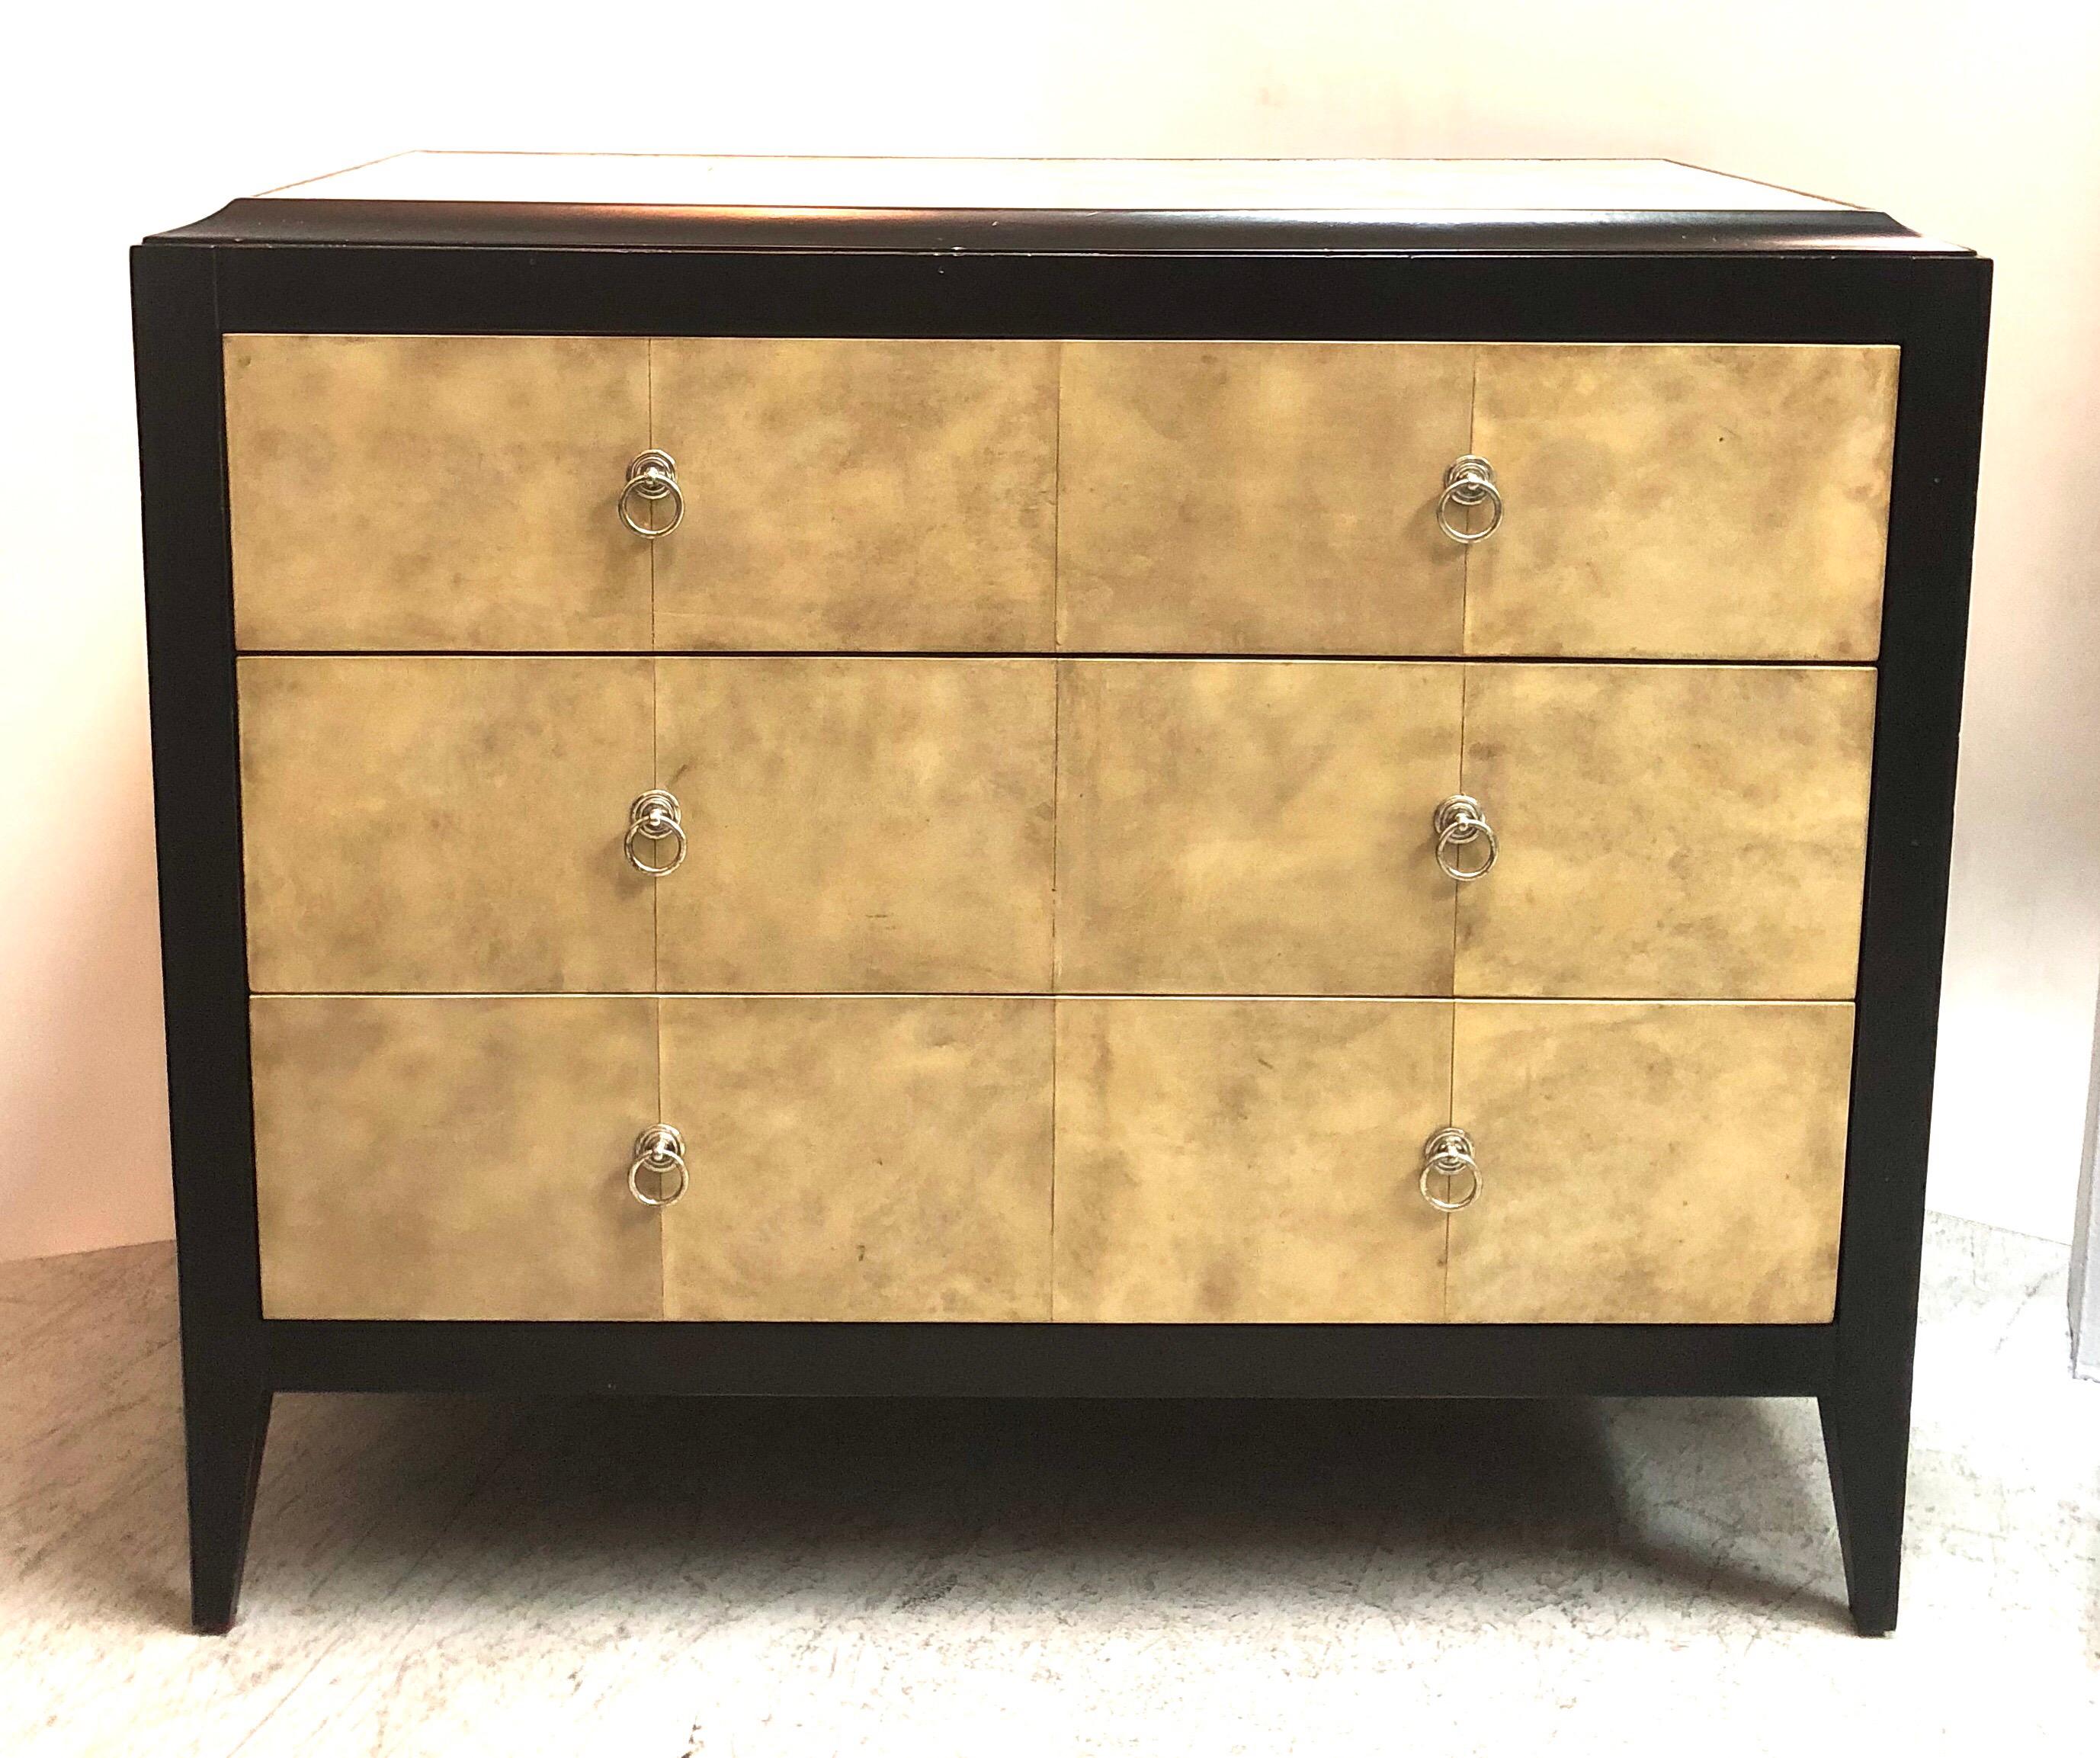 A wood and parchment chest of drawers after a design by Jean Michel Frank. The wood frame is ebonized with light distressing effects. Silver ring pulls. Ample storage.